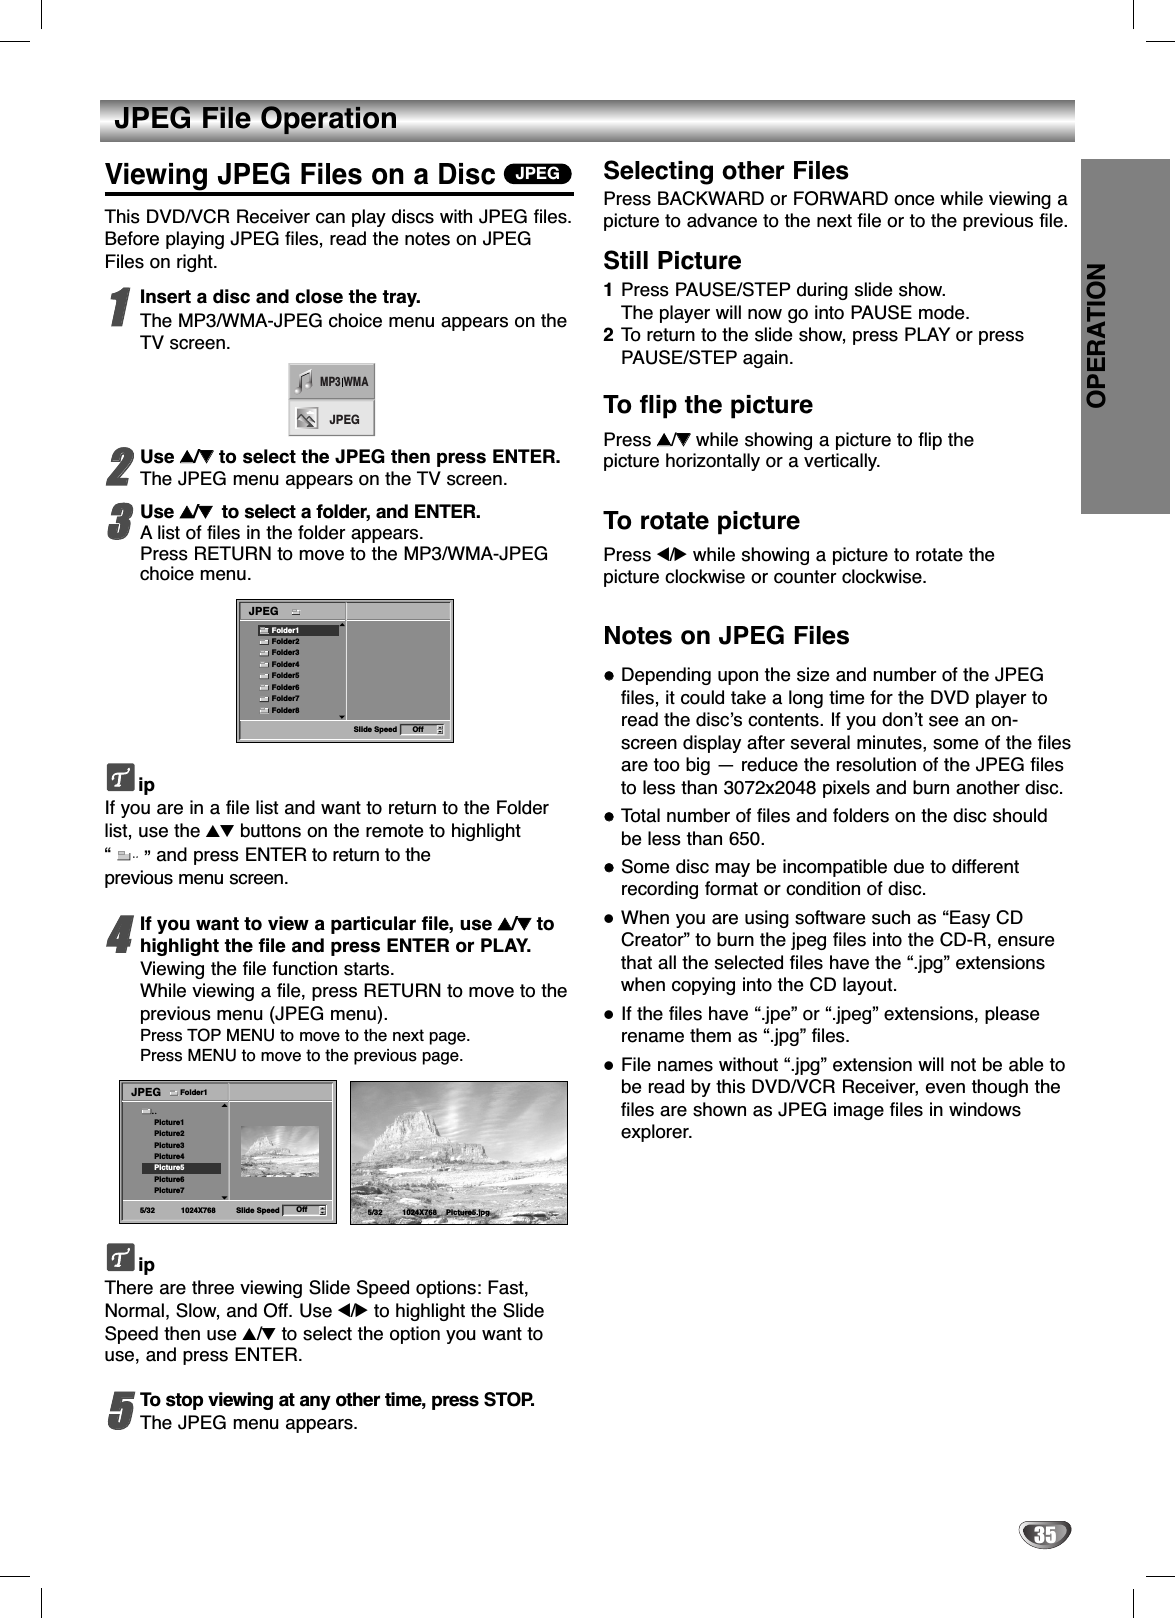 JPEG File OperationOPERATION35Viewing JPEG Files on a DiscThis DVD/VCR Receiver can play discs with JPEG files.Before playing JPEG files, read the notes on JPEGFiles on right.11Insert a disc and close the tray.The MP3/WMA-JPEG choice menu appears on theTV screen.22Use 33/44to select the JPEG then press ENTER. The JPEG menu appears on the TV screen.33Use 33/44  to select a folder, and ENTER.Alist of files in the folder appears.Press RETURN to move to the MP3/WMA-JPEGchoice menu.ipIf you are in a file list and want to return to the Folderlist, use the 34 buttons on the remote to highlight“” and press ENTER to return to theprevious menu screen.44If you want to view a particular file, use 33/44tohighlight the file and press ENTER or PLAY.Viewing the file function starts. While viewing a file, press RETURN to move to theprevious menu (JPEG menu).Press TOP MENU to move to the next page.Press MENU to move to the previous page.ipThere are three viewing Slide Speed options: Fast,Normal, Slow, and Off. Use 1/2to highlight the SlideSpeed then use 3/4to select the option you want touse, and press ENTER. 55To stop viewing at any other time, press STOP.The JPEG menu appears.Selecting other FilesPress BACKWARD or FORWARD once while viewing apicture to advance to the next file or to the previous file.Still Picture 1Press PAUSE/STEP during slide show.The player will now go into PAUSE mode. 2To  return to the slide show, press PLAY or pressPAUSE/STEP again.To flip the picturePress 33/44while showing a picture to flip the picture horizontally or a vertically.To rotate picturePress 1/2while showing a picture to rotate the picture clockwise or counter clockwise.Notes on JPEG FilesDepending upon the size and number of the JPEGfiles, it could take a long time for the DVD player toread the disc’s contents. If you don’t see an on-screen display after several minutes, some of the filesare too big — reduce the resolution of the JPEG filesto less than 3072x2048 pixels and burn another disc.Total number of files and folders on the disc shouldbe less than 650.Some disc may be incompatible due to differentrecording format or condition of disc.When you are using software such as “Easy CDCreator” to burn the jpeg files into the CD-R, ensurethat all the selected files have the “.jpg” extensionswhen copying into the CD layout.If the files have “.jpe” or “.jpeg” extensions, pleaserename them as “.jpg” files.File names without “.jpg” extension will not be able tobe read by this DVD/VCR Receiver, even though thefiles are shown as JPEG image files in windowsexplorer.JPEGSlide Speed OffFolder1Folder2Folder3Folder4Folder5Folder6Folder7Folder8JPEGMP3 WMAJPEG5/32 Picture5.jpg1024X768Slide Speed5/32 1024X768Picture1Picture2Picture3Picture4Picture5Picture6Picture7JPEGOffFolder1